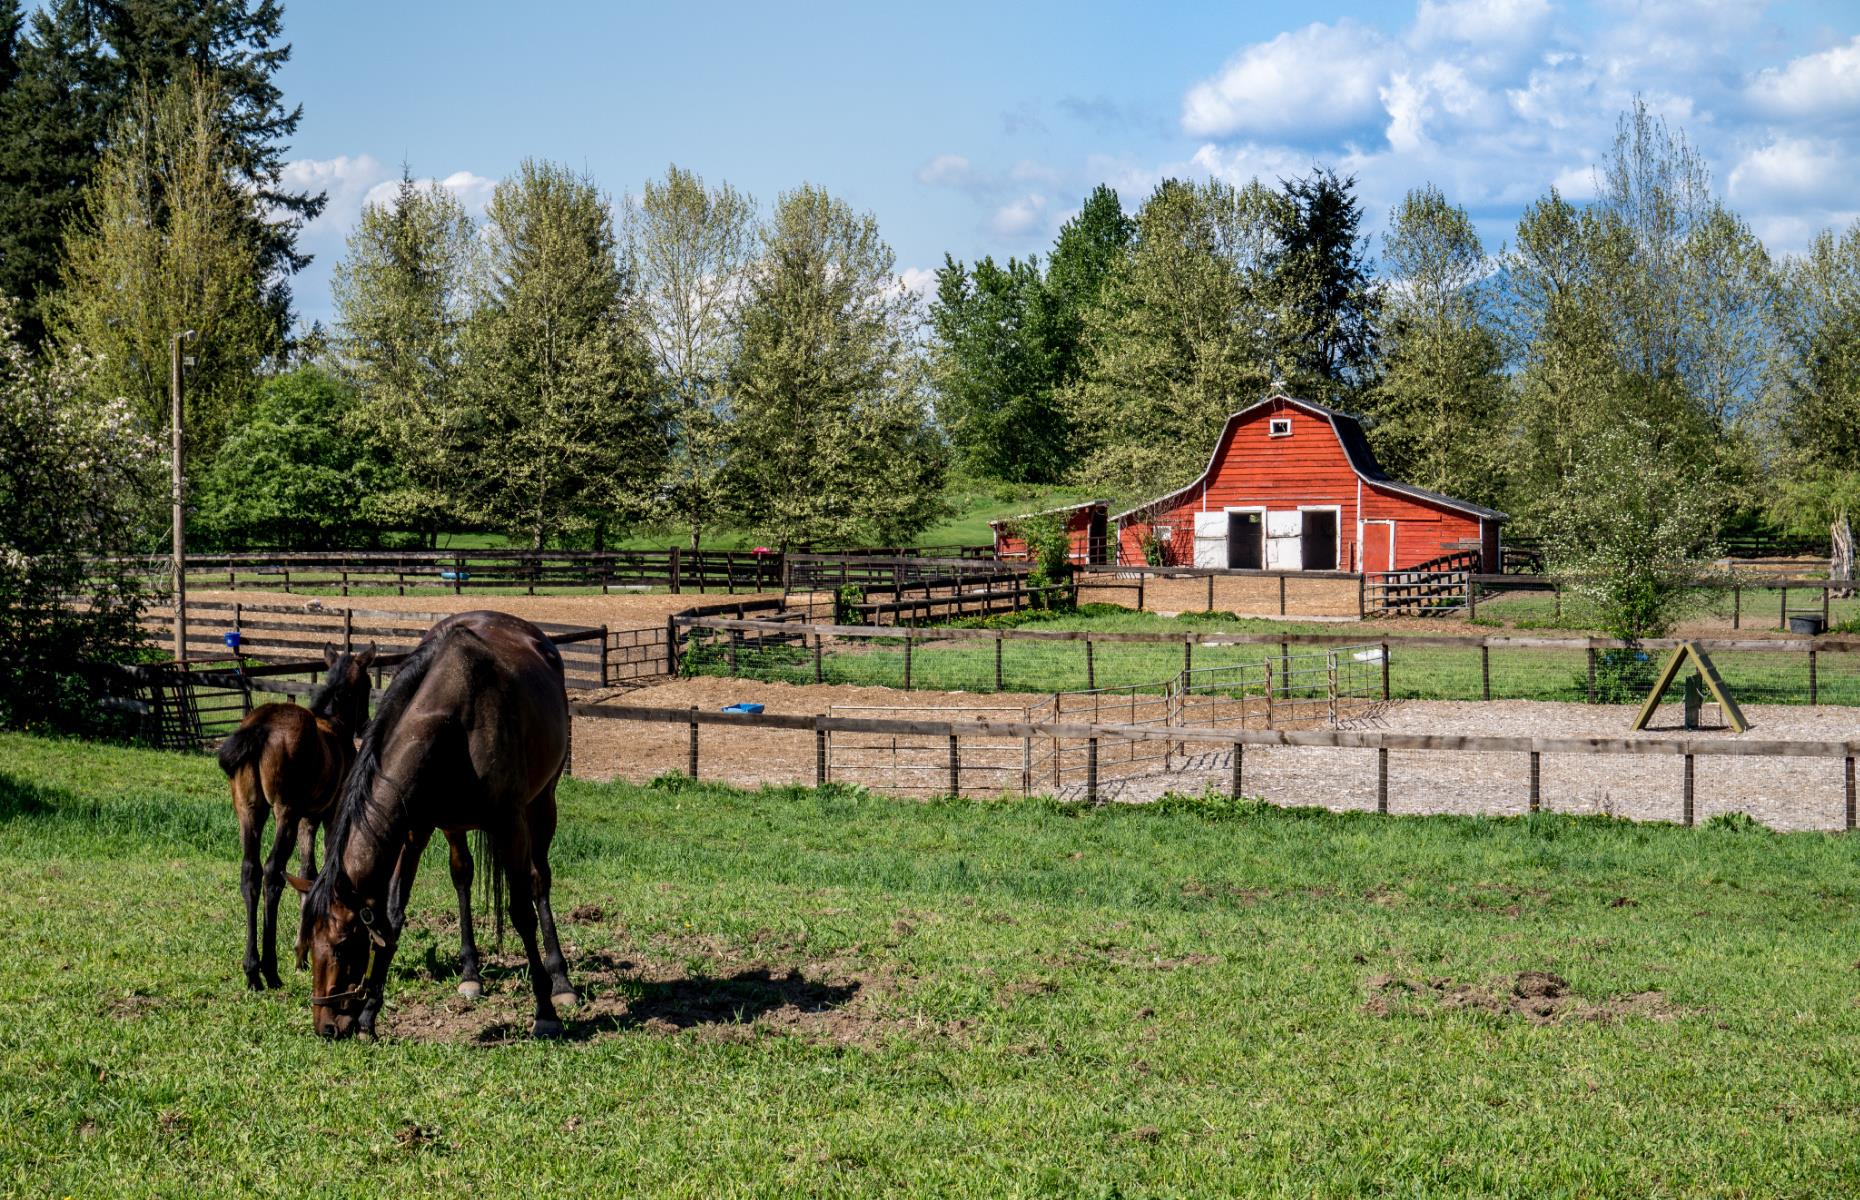 <p>The river valley makes for some of the most fertile farmland in Canada and many local food producers welcome visitors for either formal or self-guided tours. History lovers can also stop at the <a href="https://www.pc.gc.ca/en/lhn-nhs/bc/langley">Fort Langley National Historic Site</a>, an interpretive center that served as a working Hudson’s Bay Company fur trading post 150 years ago.</p>